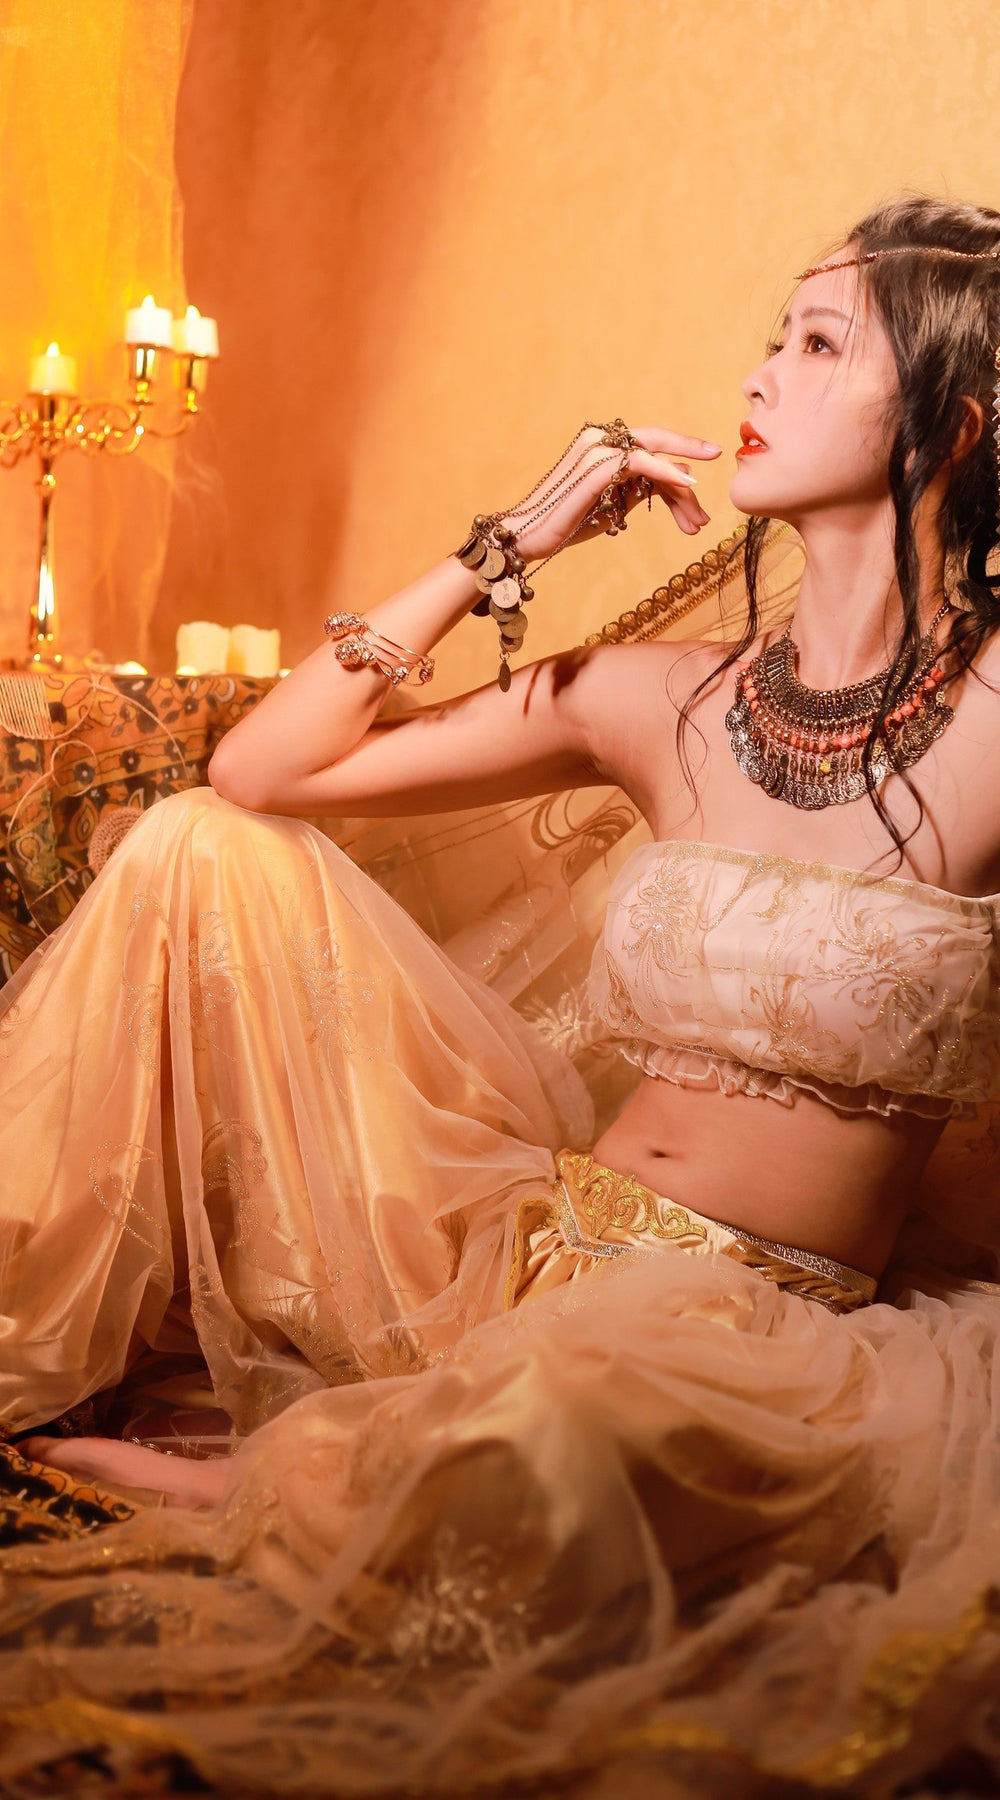 Golden Egyptian Princess Costume Elegant Sparkling Fabric Outfit